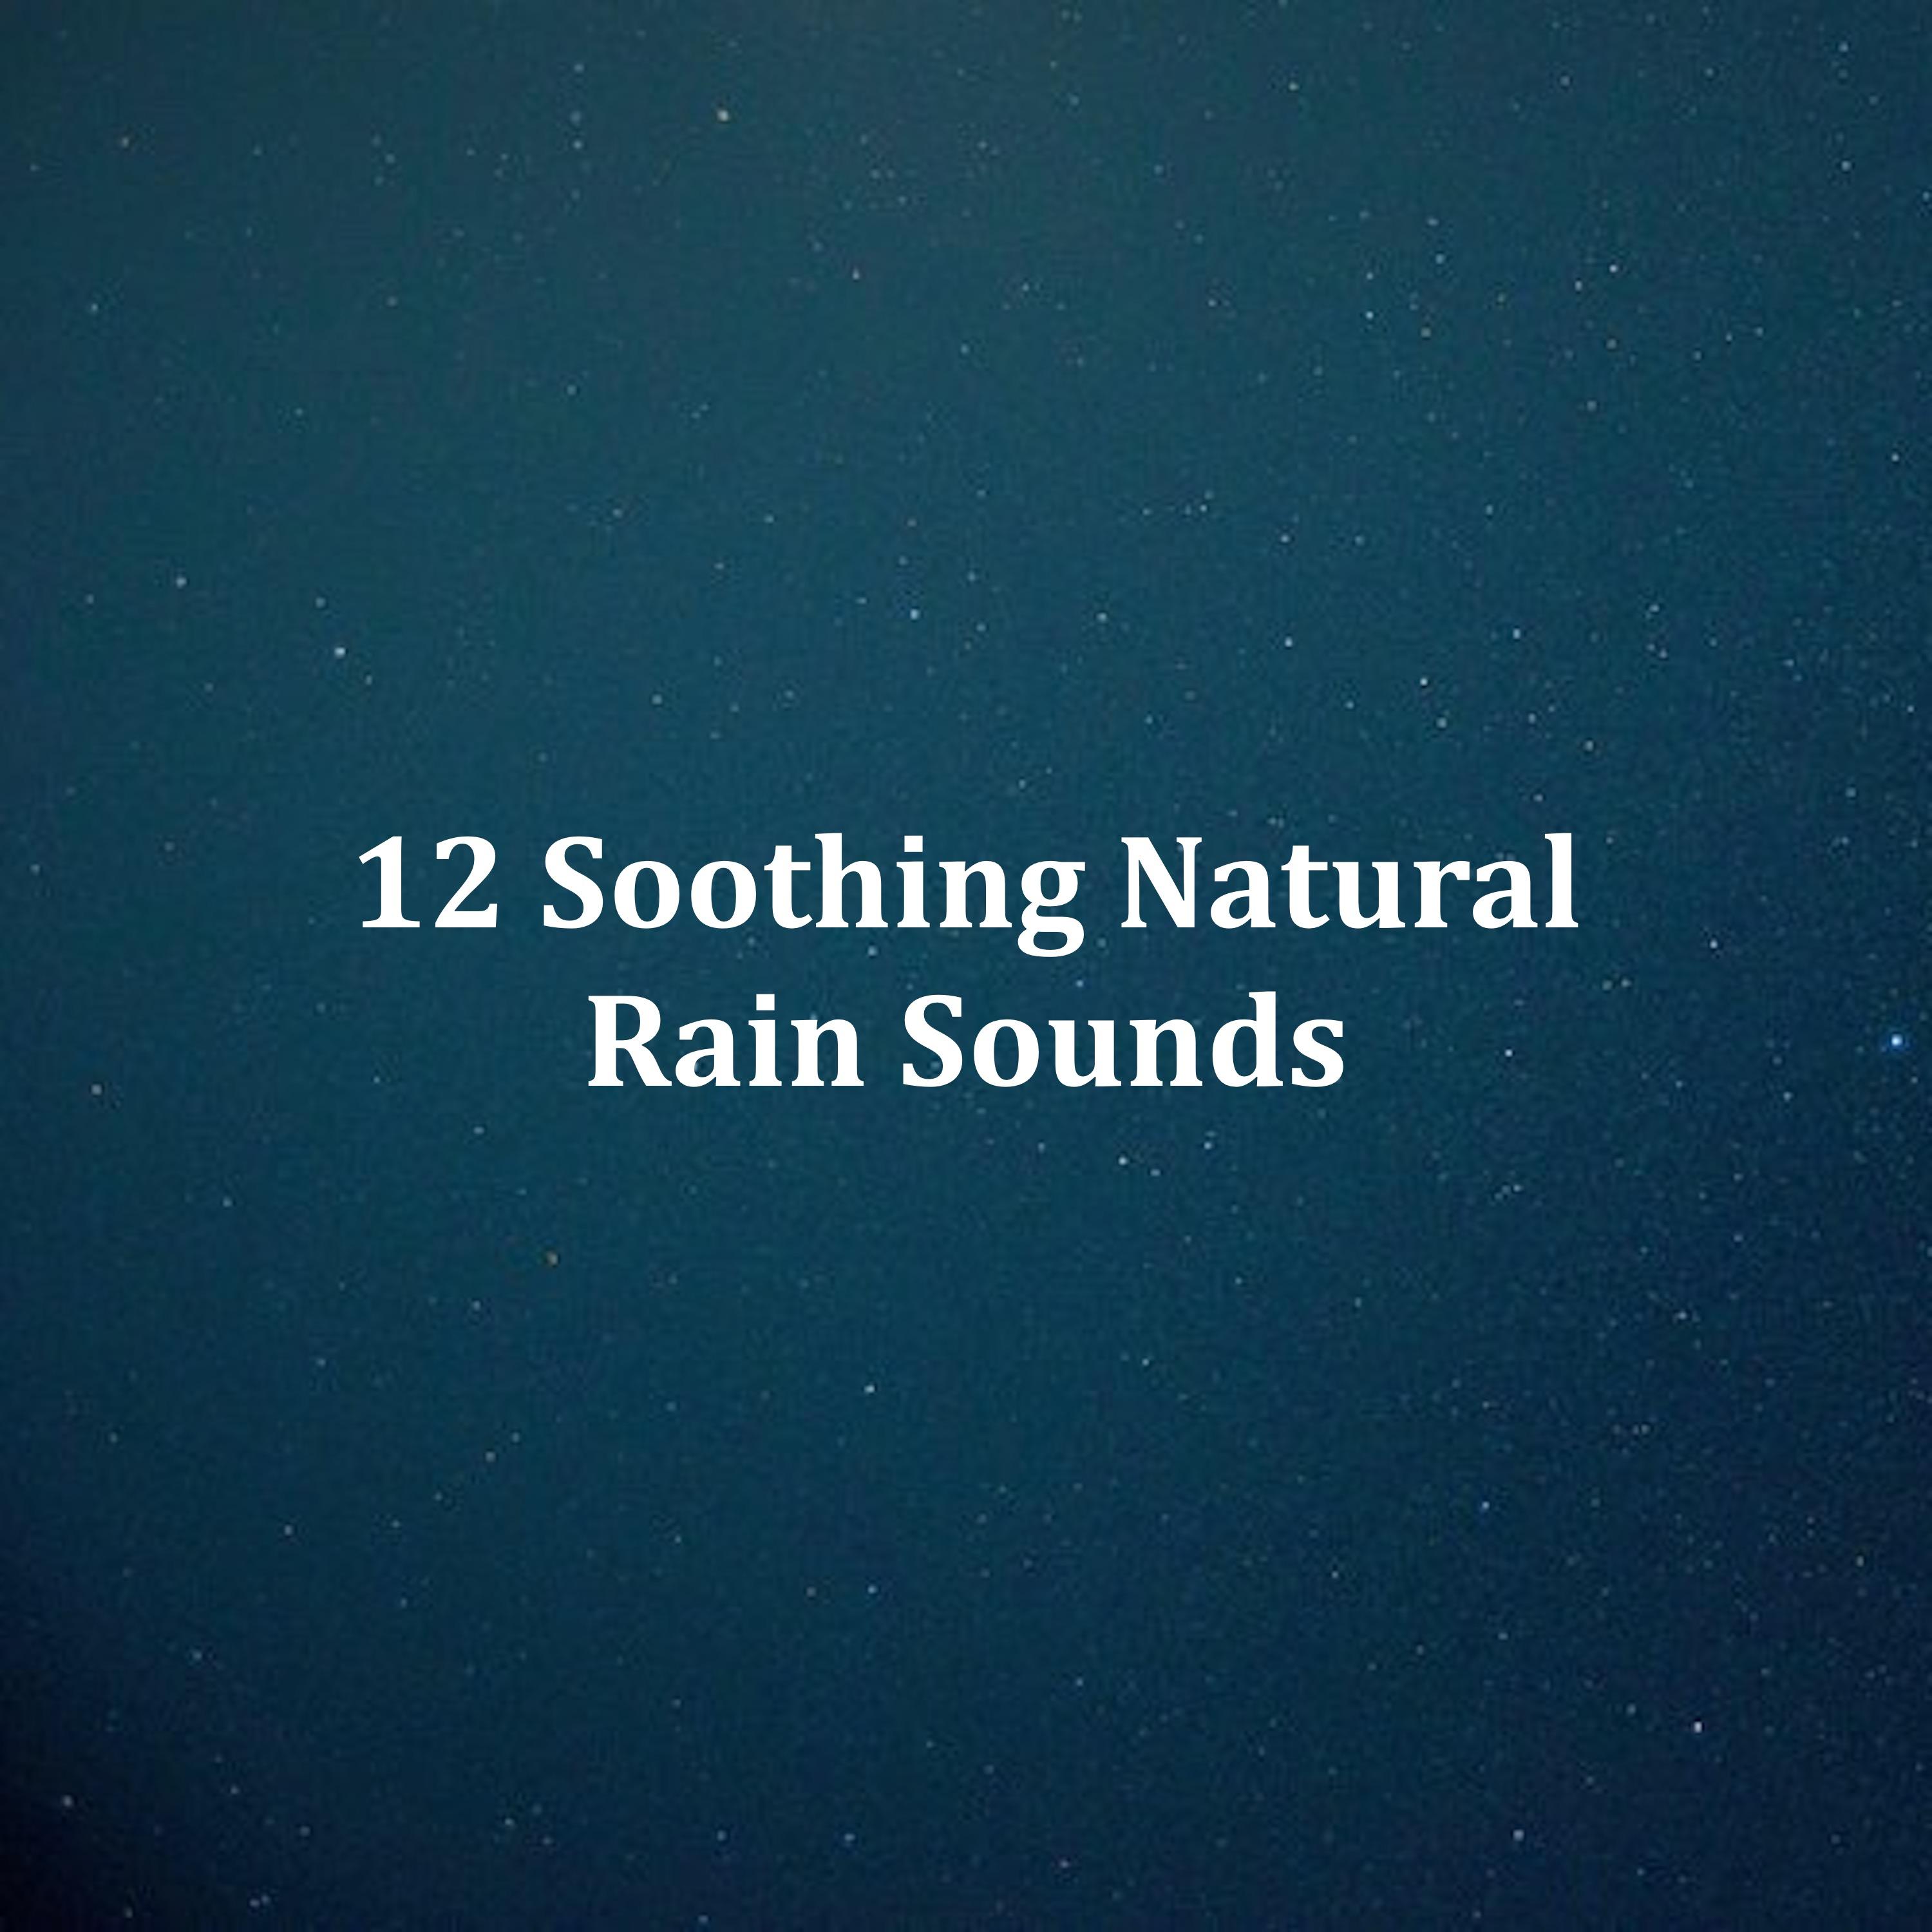 12 Soothing Loopable Rain Sounds